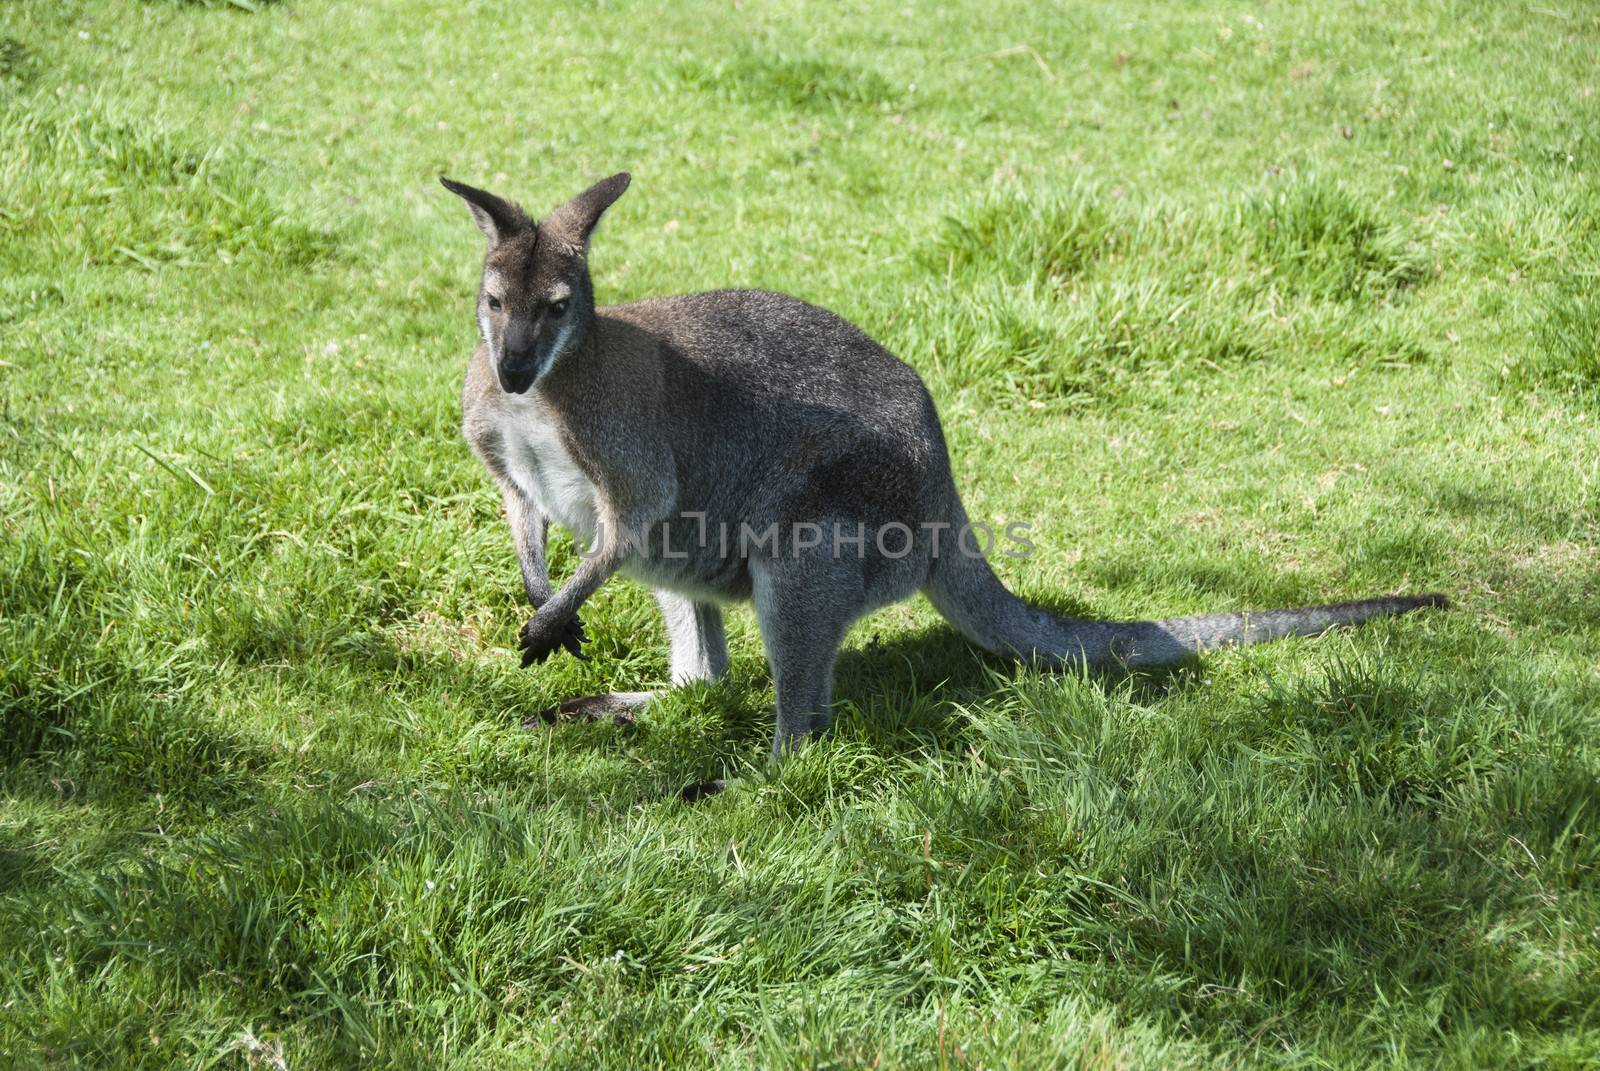 Wallaby by d40xboy